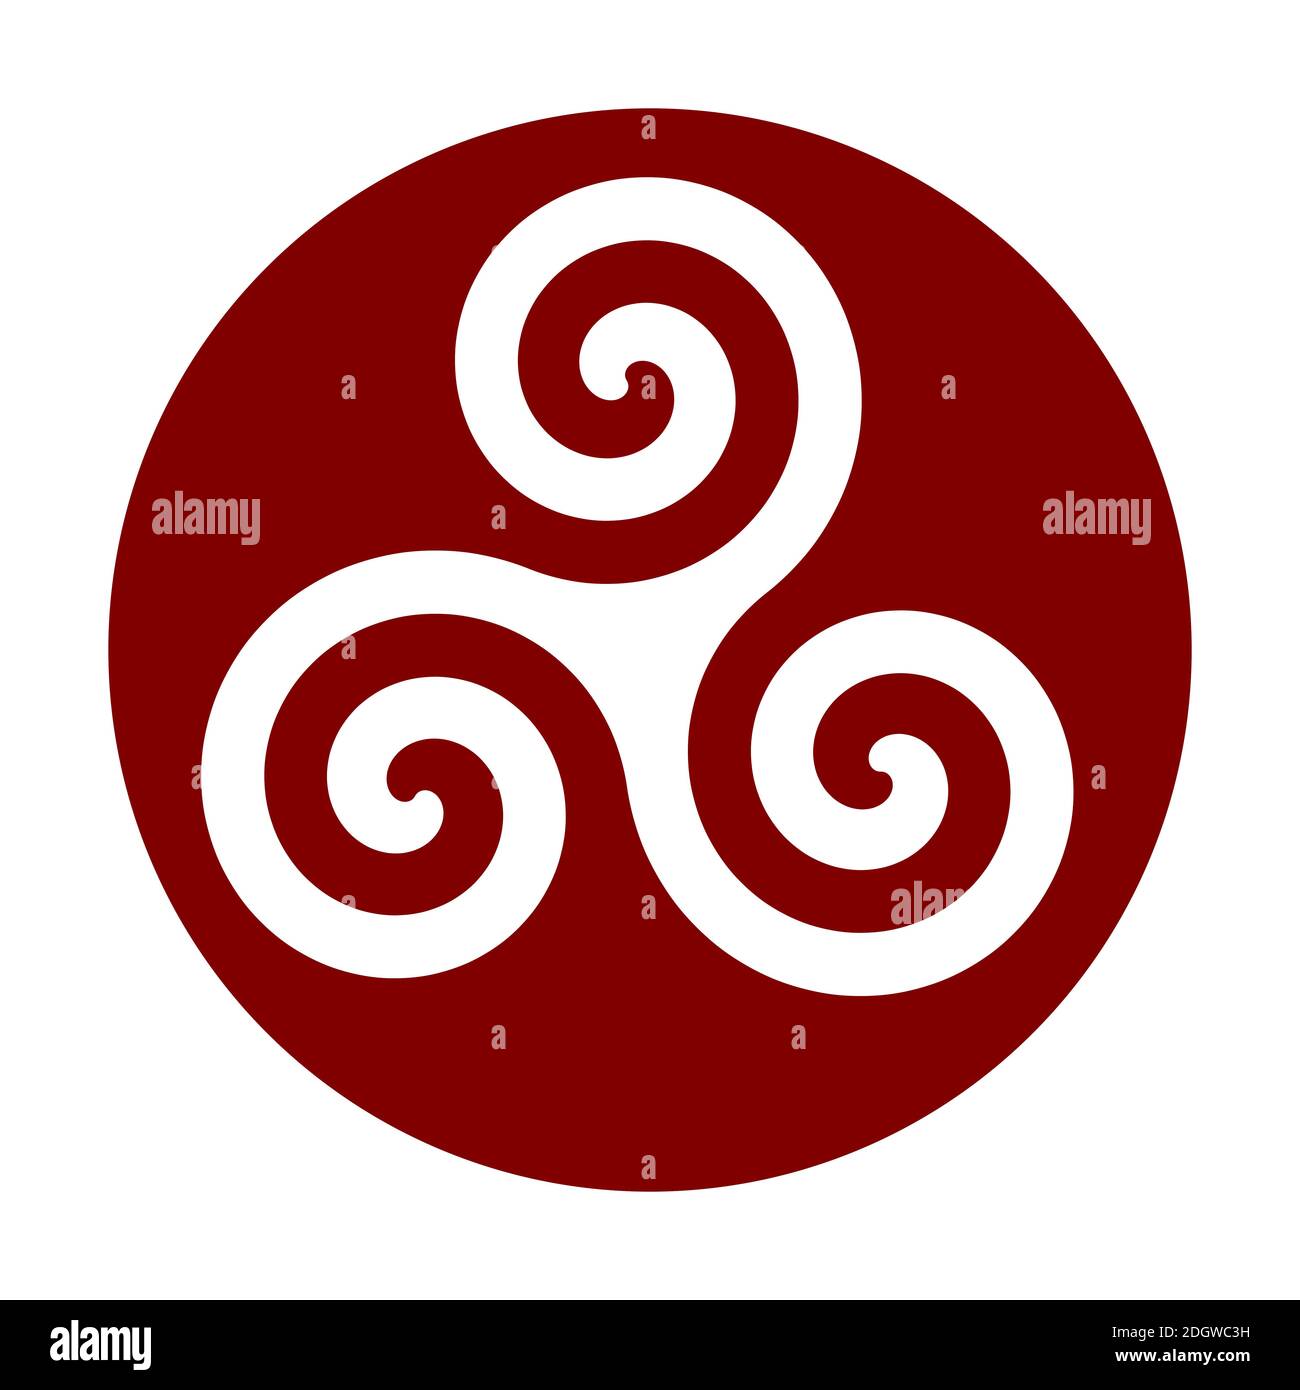 Triskelion symbol icon in a red circle Stock Photo